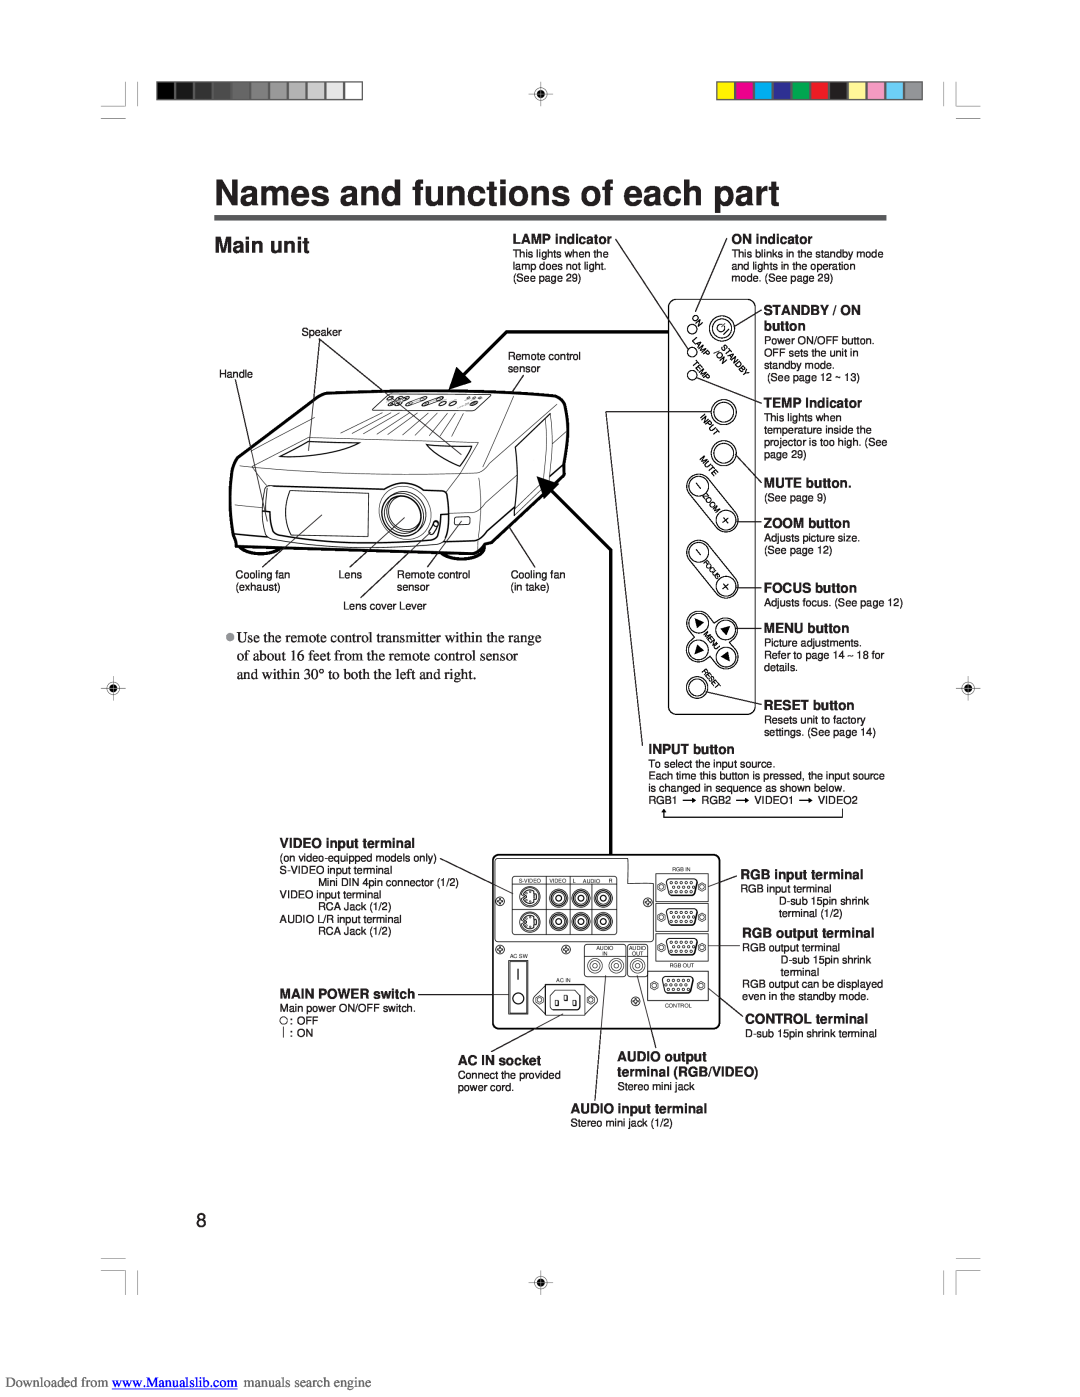 Hitachi CP-X955E specifications Names and functions of each part, Main unit 